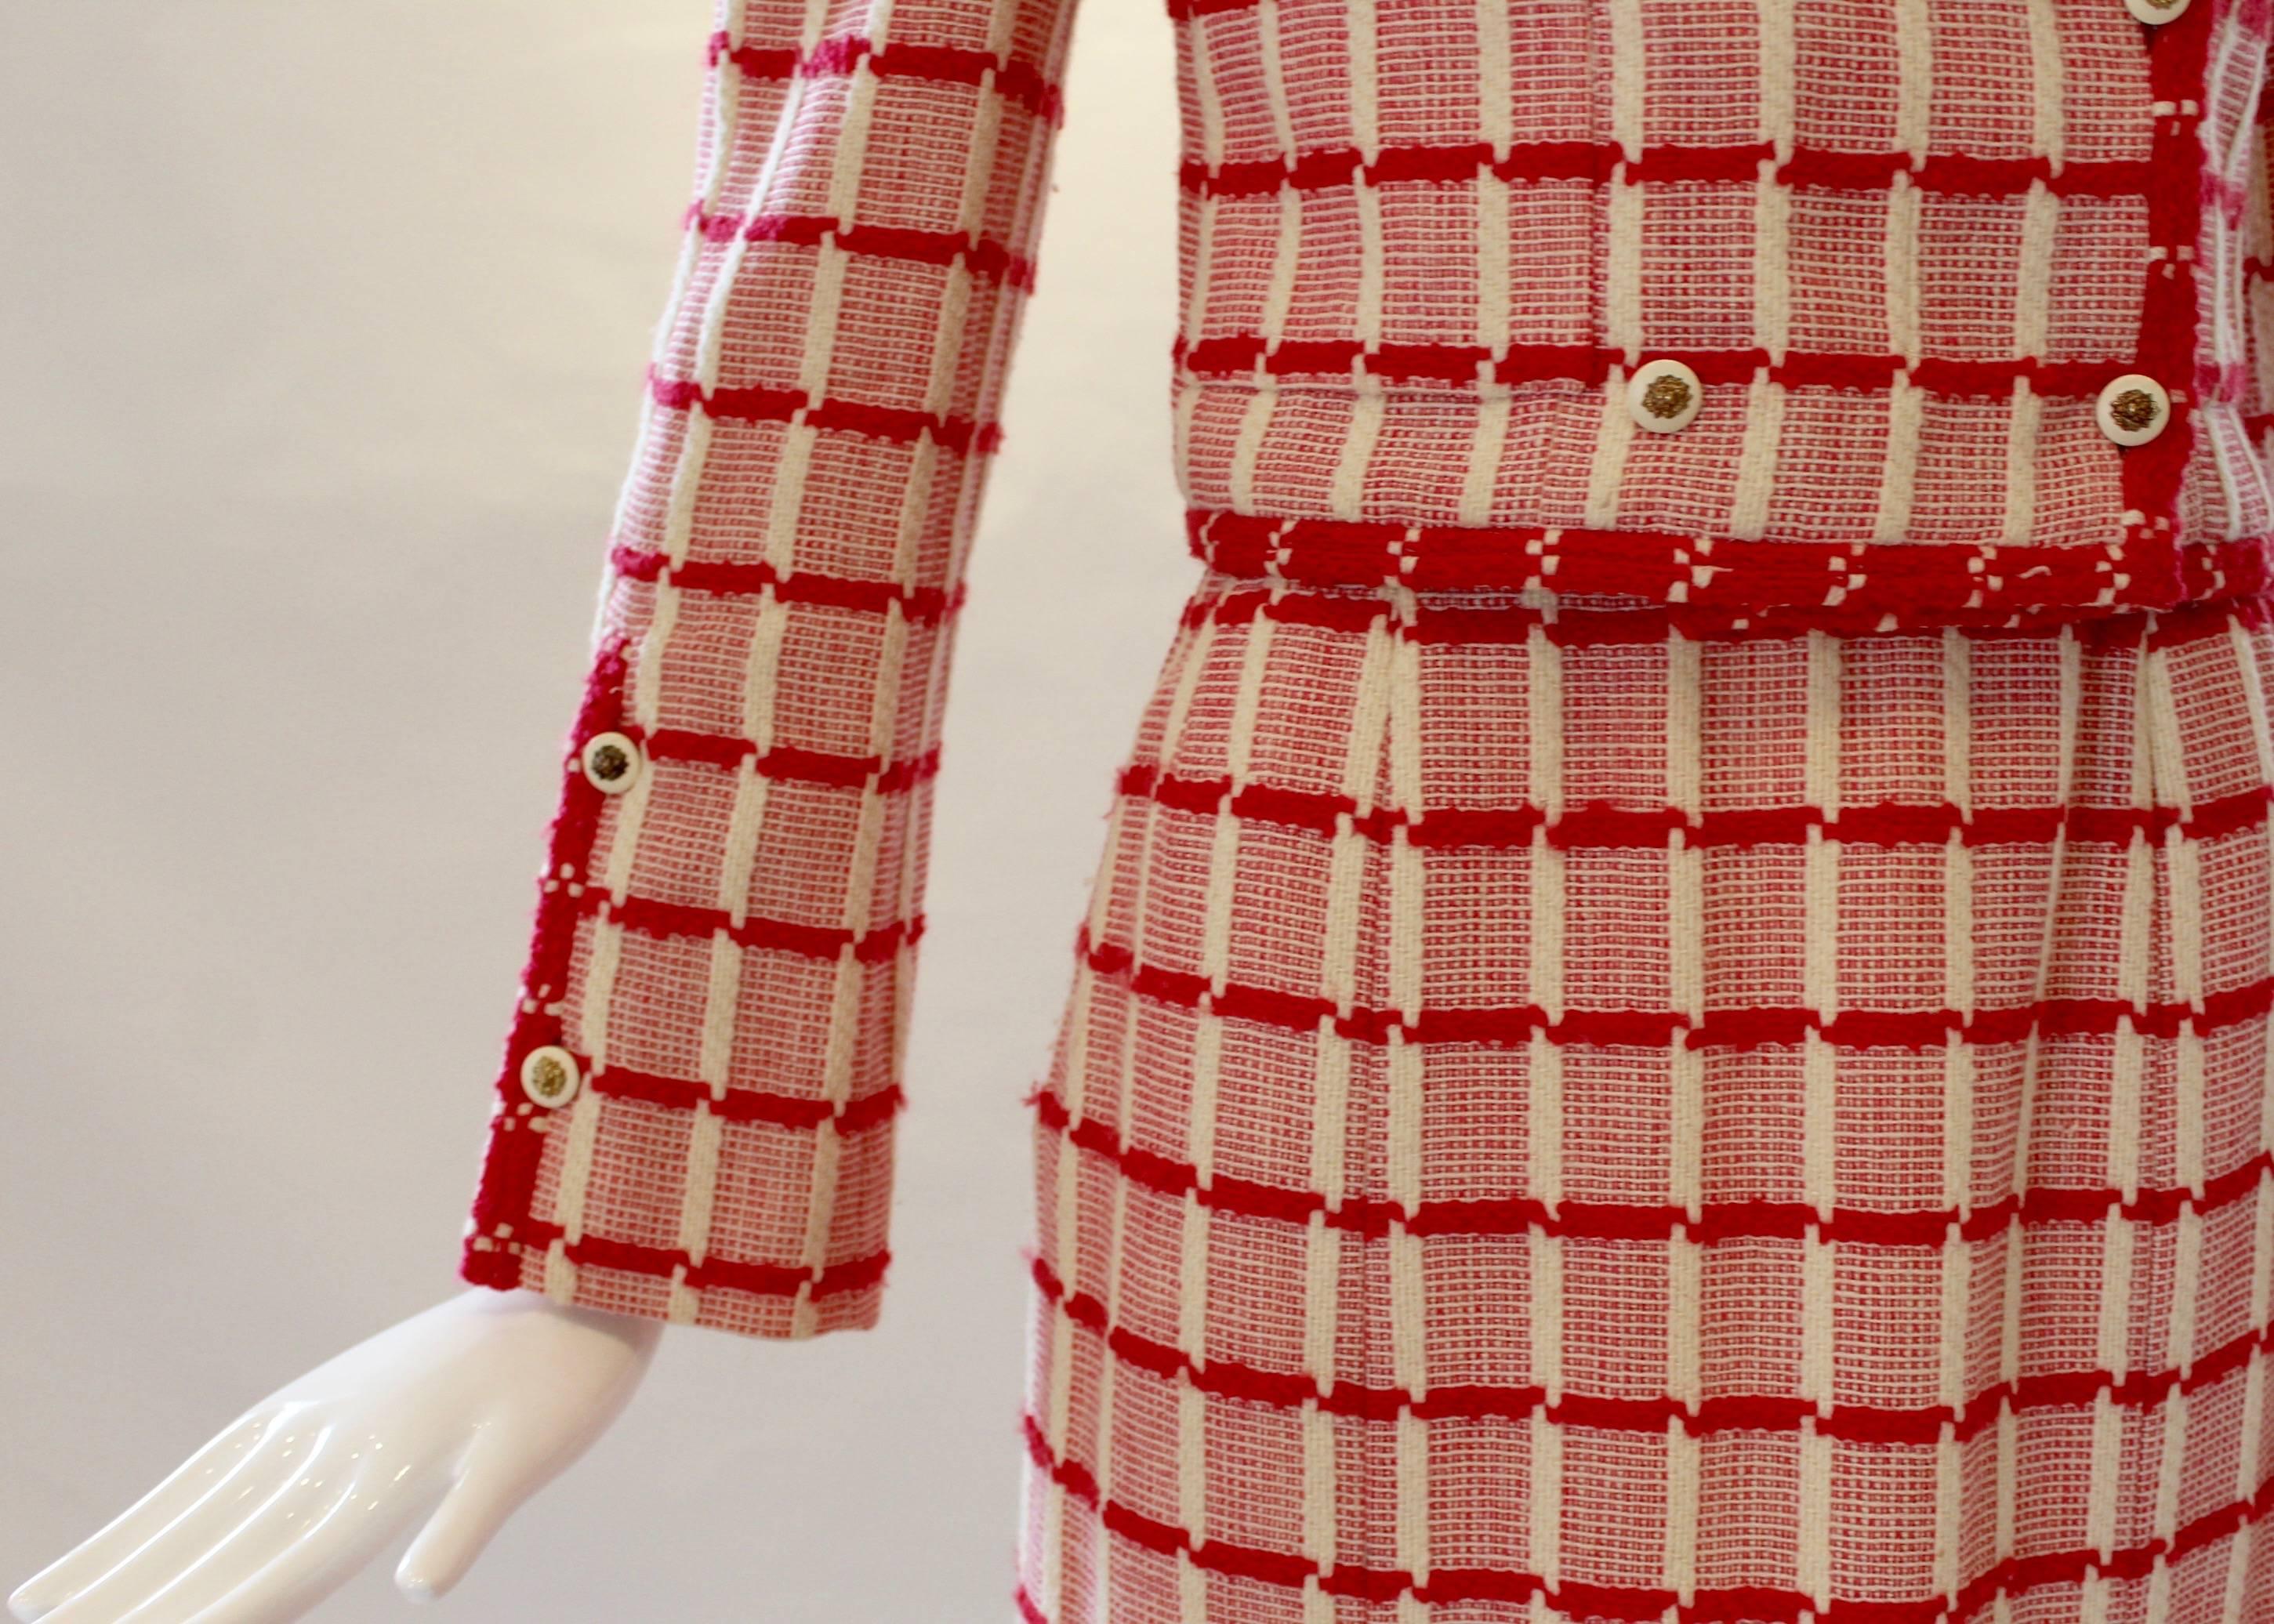 A rare vintage find! This chic skirt suit from Chanel boasts a red and cream grid pattern and is finished with signature Chanel lion’s head buttons. It includes a jacket with front pockets and button closure and a high-waisted knee-length pleated